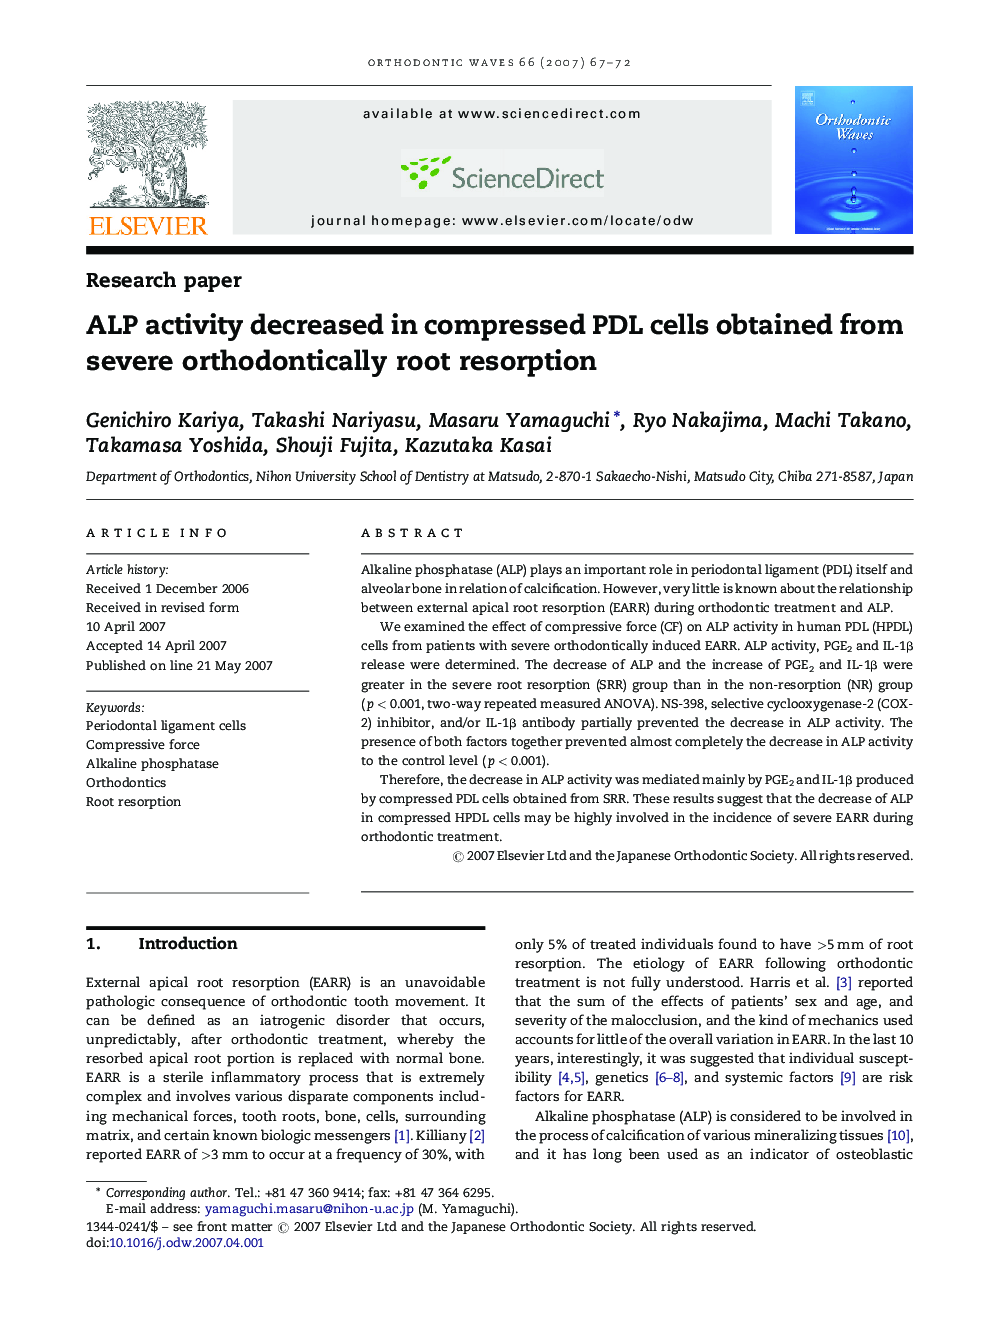 ALP activity decreased in compressed PDL cells obtained from severe orthodontically root resorption